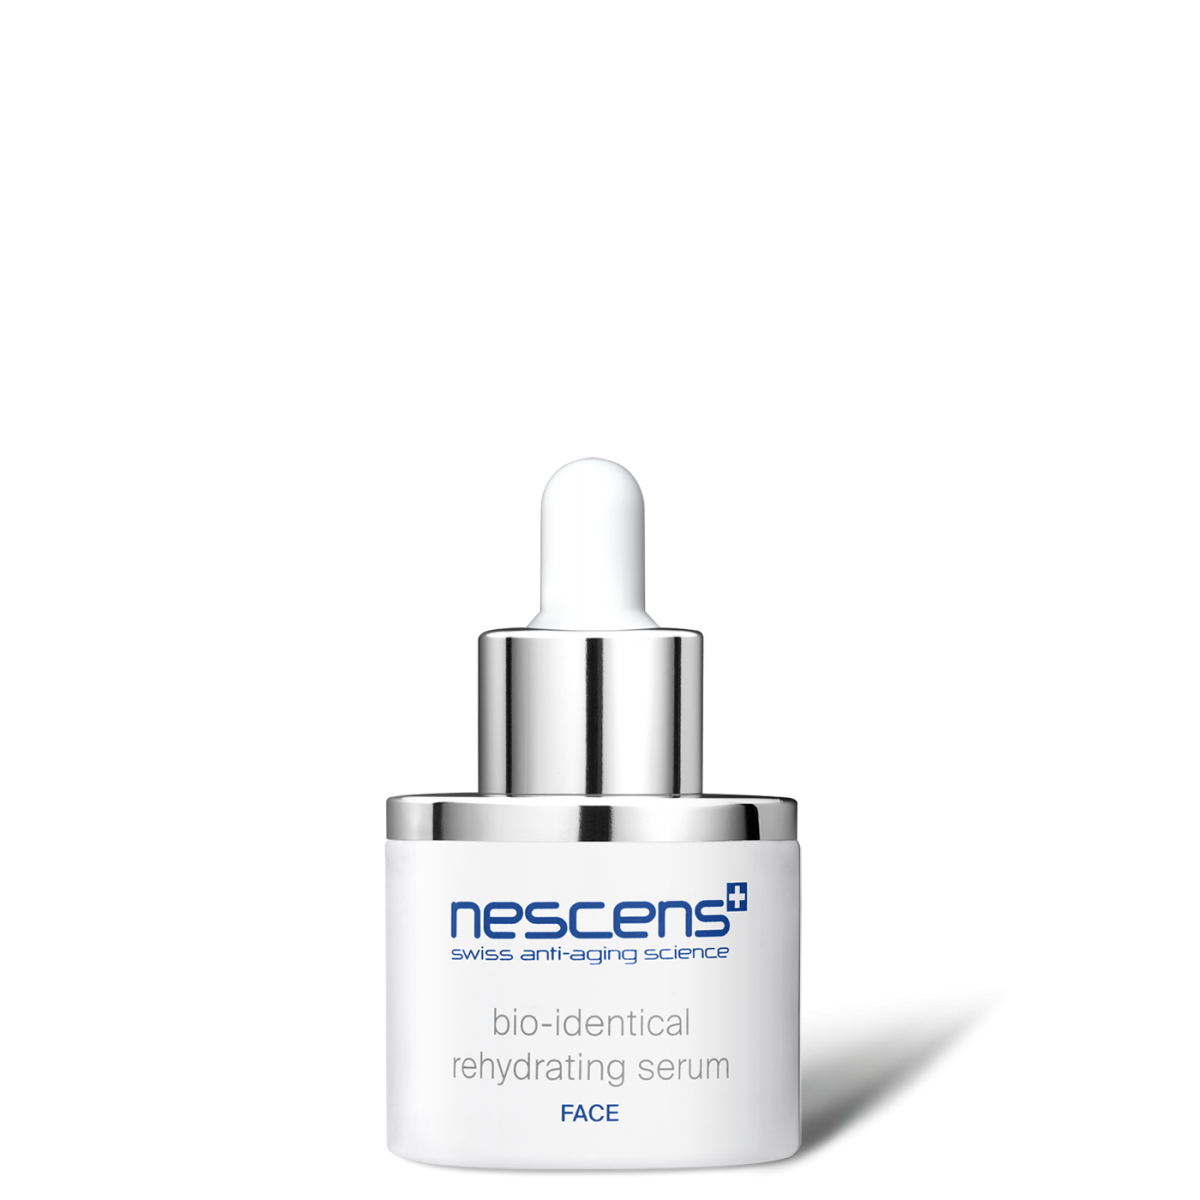 The Bio-identical Rehydrating Serum for dehydrated skin reduces wrinkles and gives the appearance of plump, youthful skin. - NS114